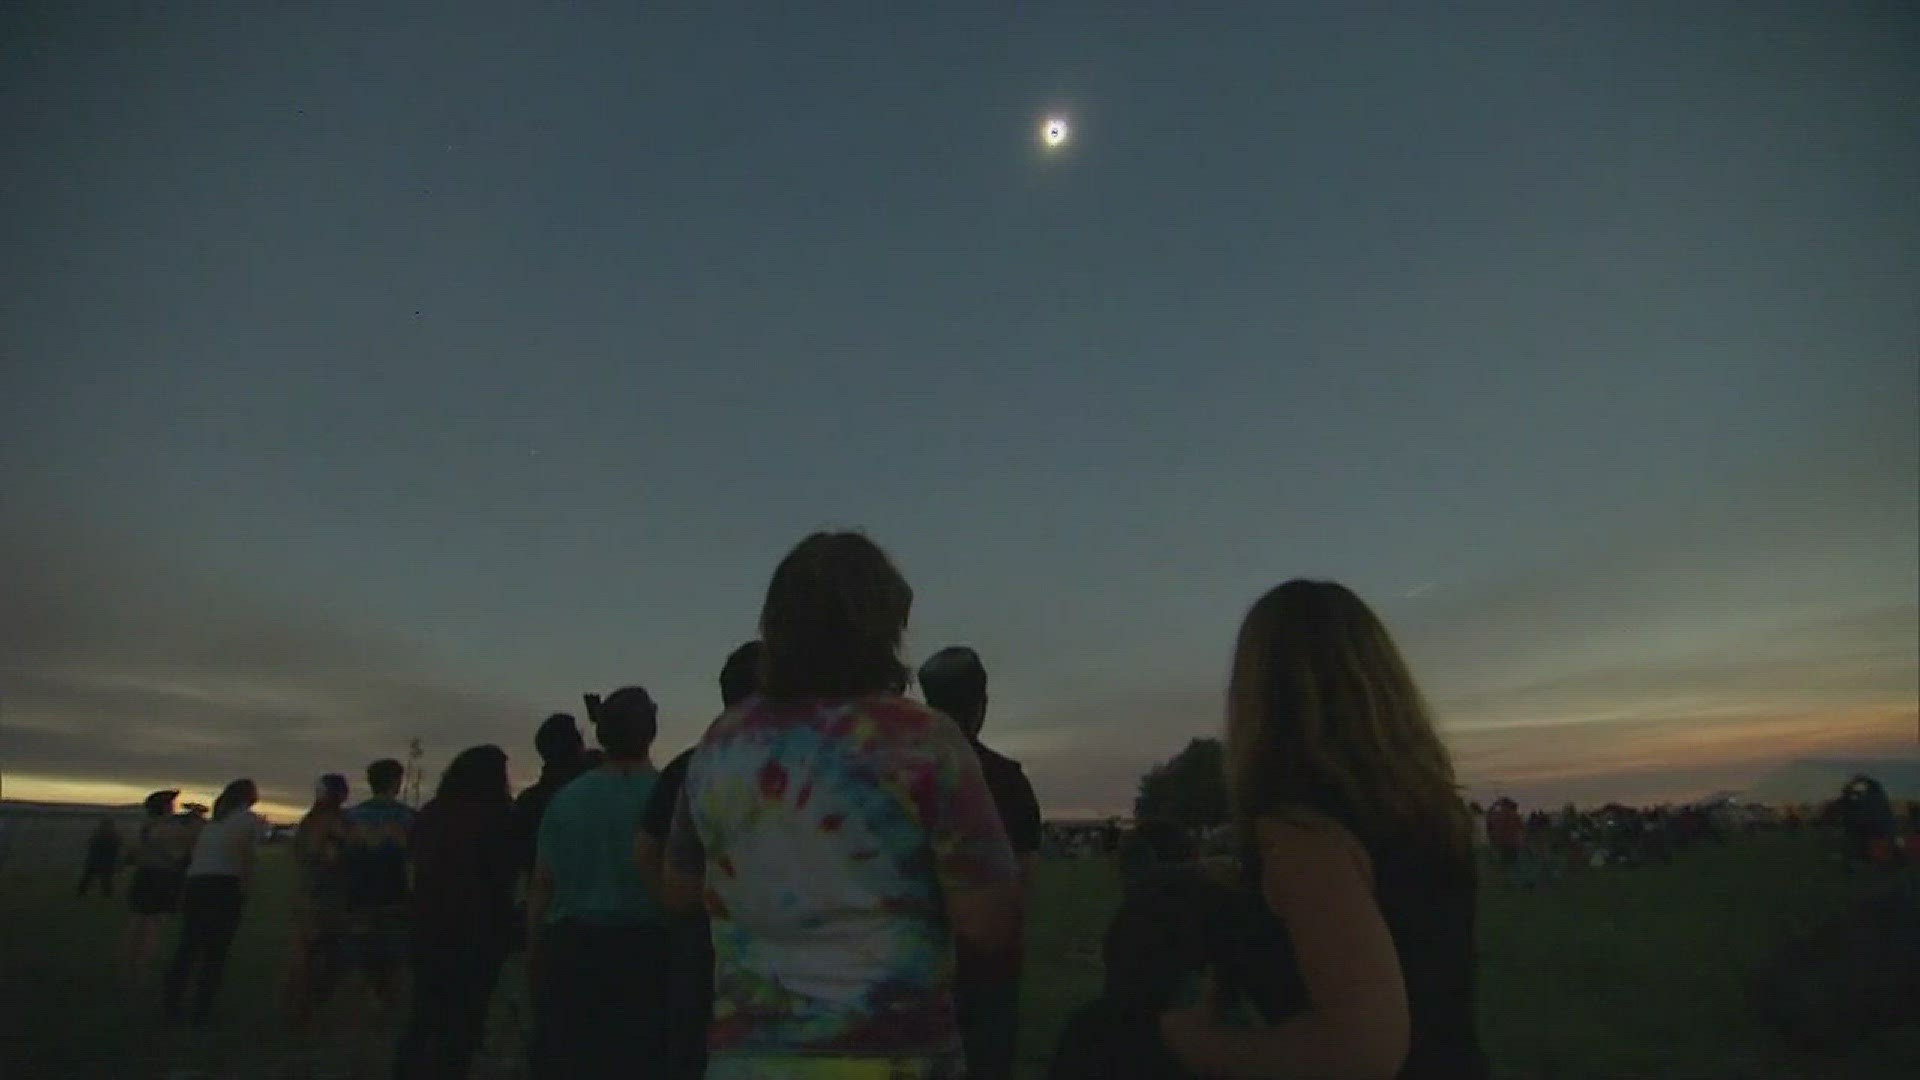 From cheers to tears, Americans put on their eclipse glasses and headed outdoors to enjoy a rare treat Monday. "Short of the birth of my kids, it was the most beautiful thing I've seen in my life," said David Wiza Of Beaverton, Oregon. "I'm an emotional b